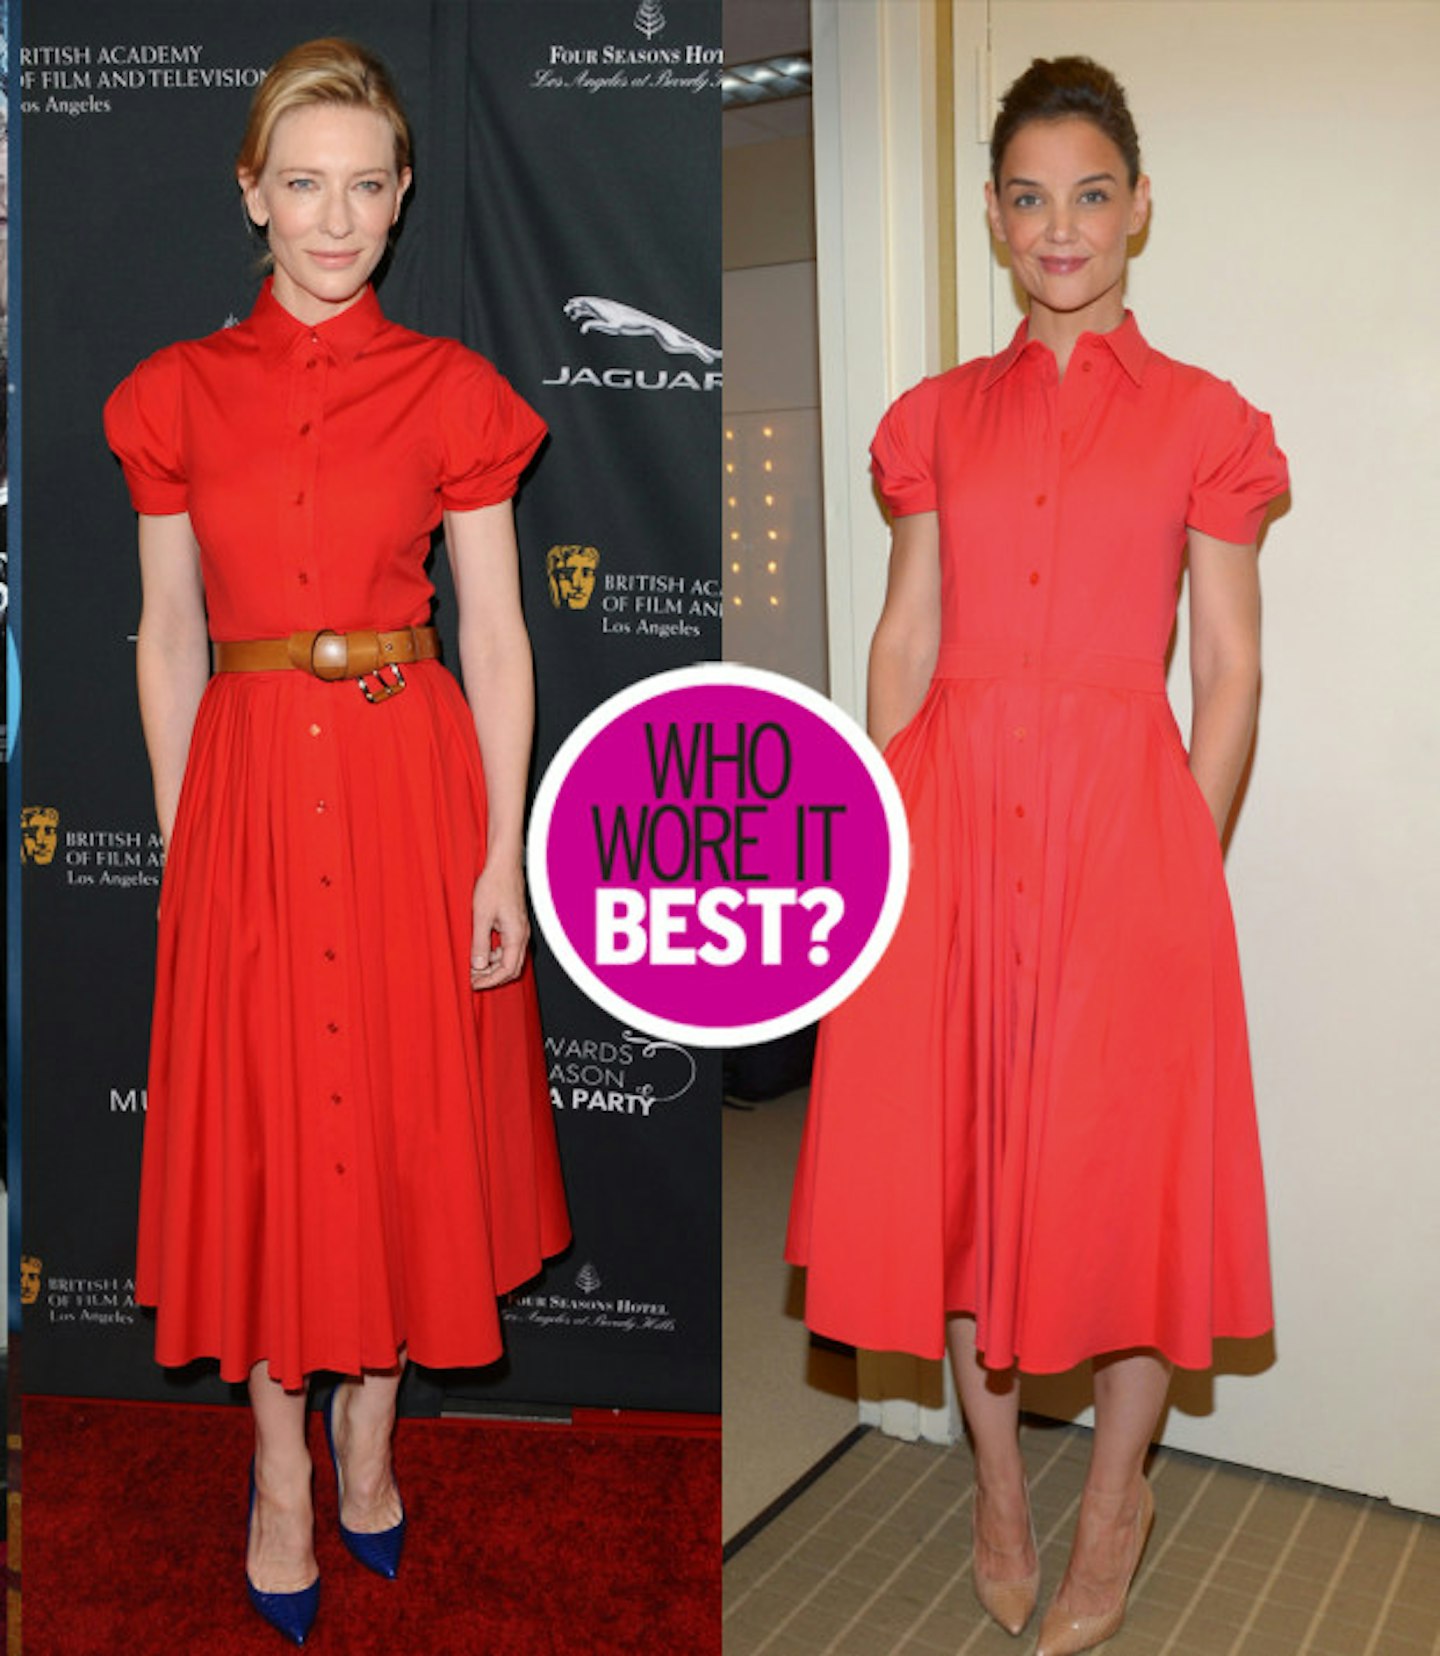 who-wore-it-best-katie-holmes-cate-blanchett-red-button-dress